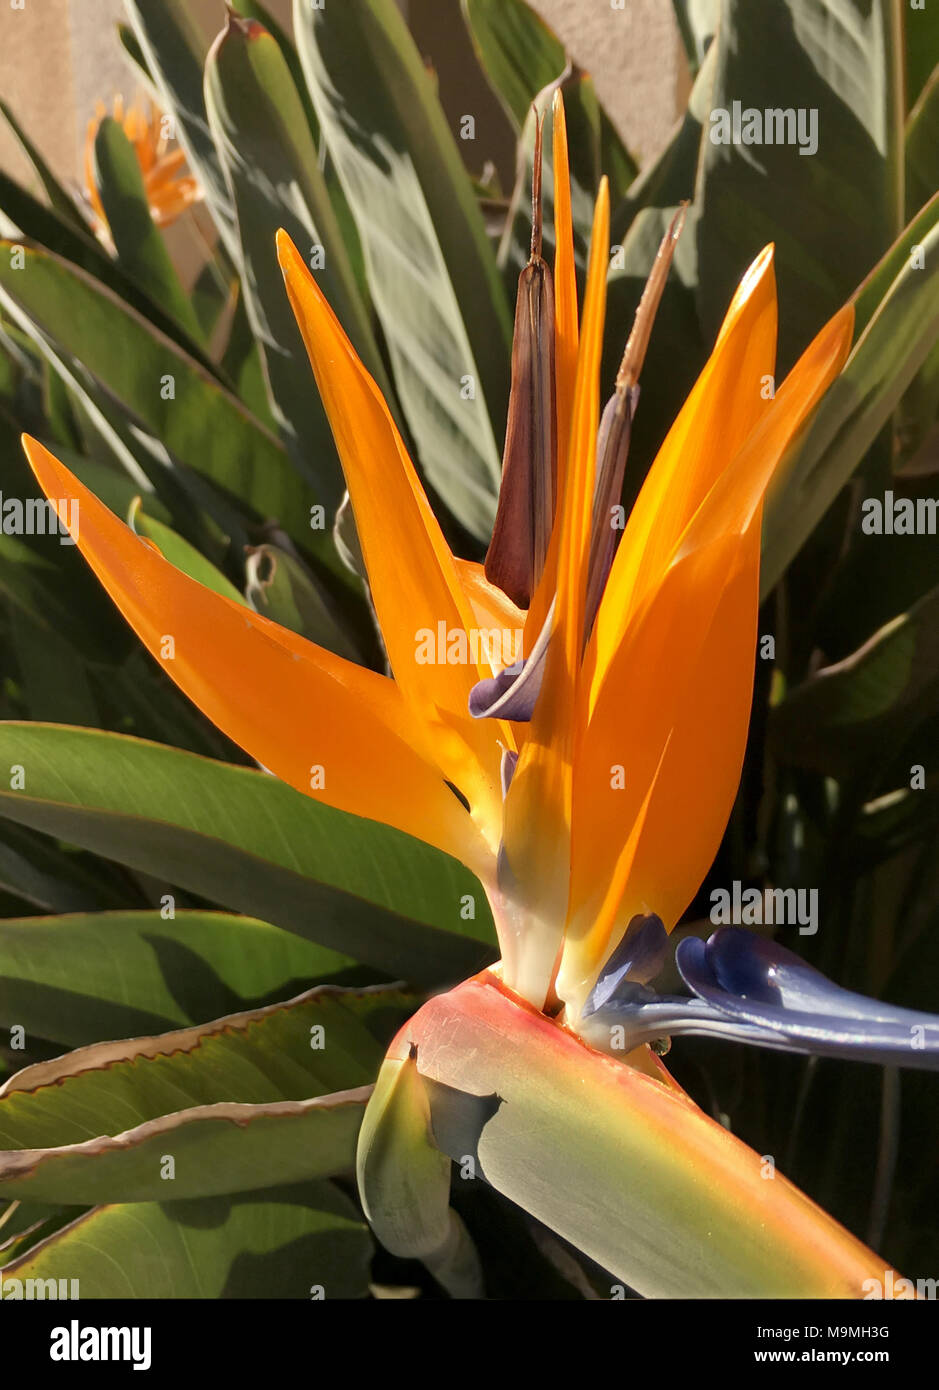 beautiful orange flowers of stelitzia Reginae also know as the crane flower or bird of paradise shown growing in a sunny walled courtyard Stock Photo